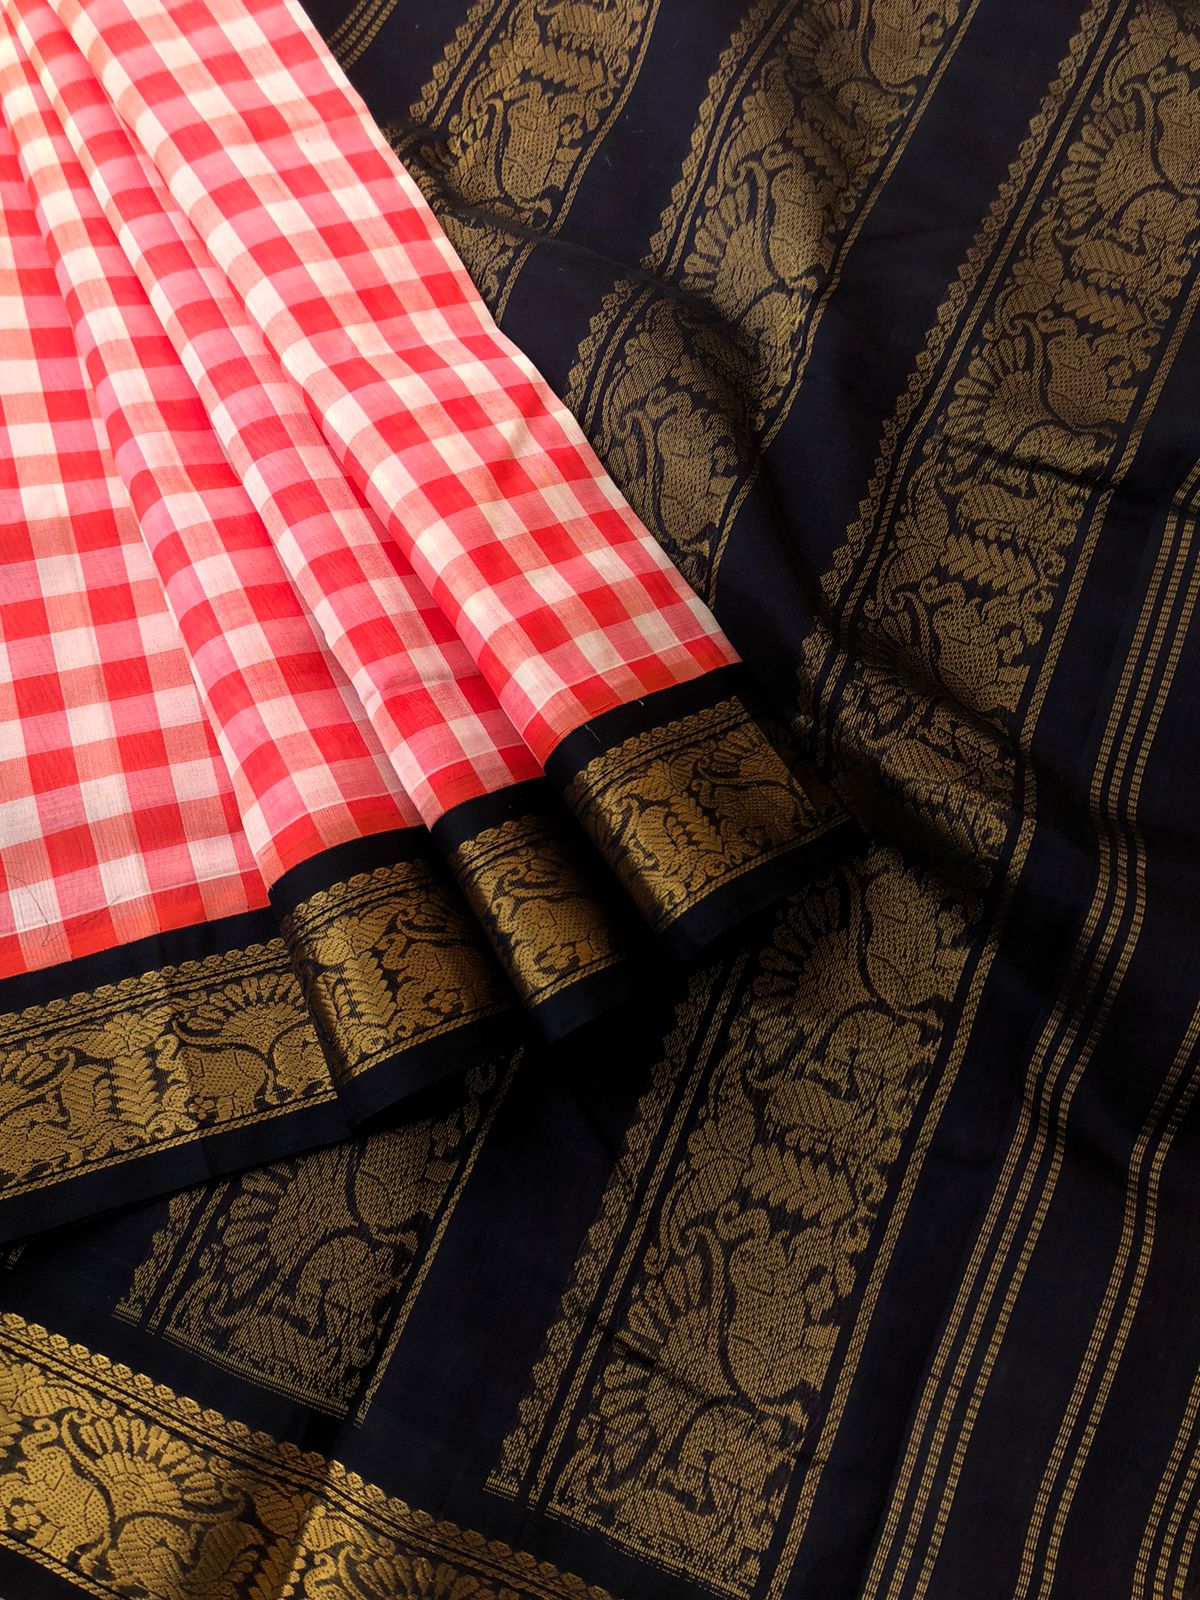 Paalum palamum kattam on Korvai Silk Cotton - off and red chex with black borders and pallu